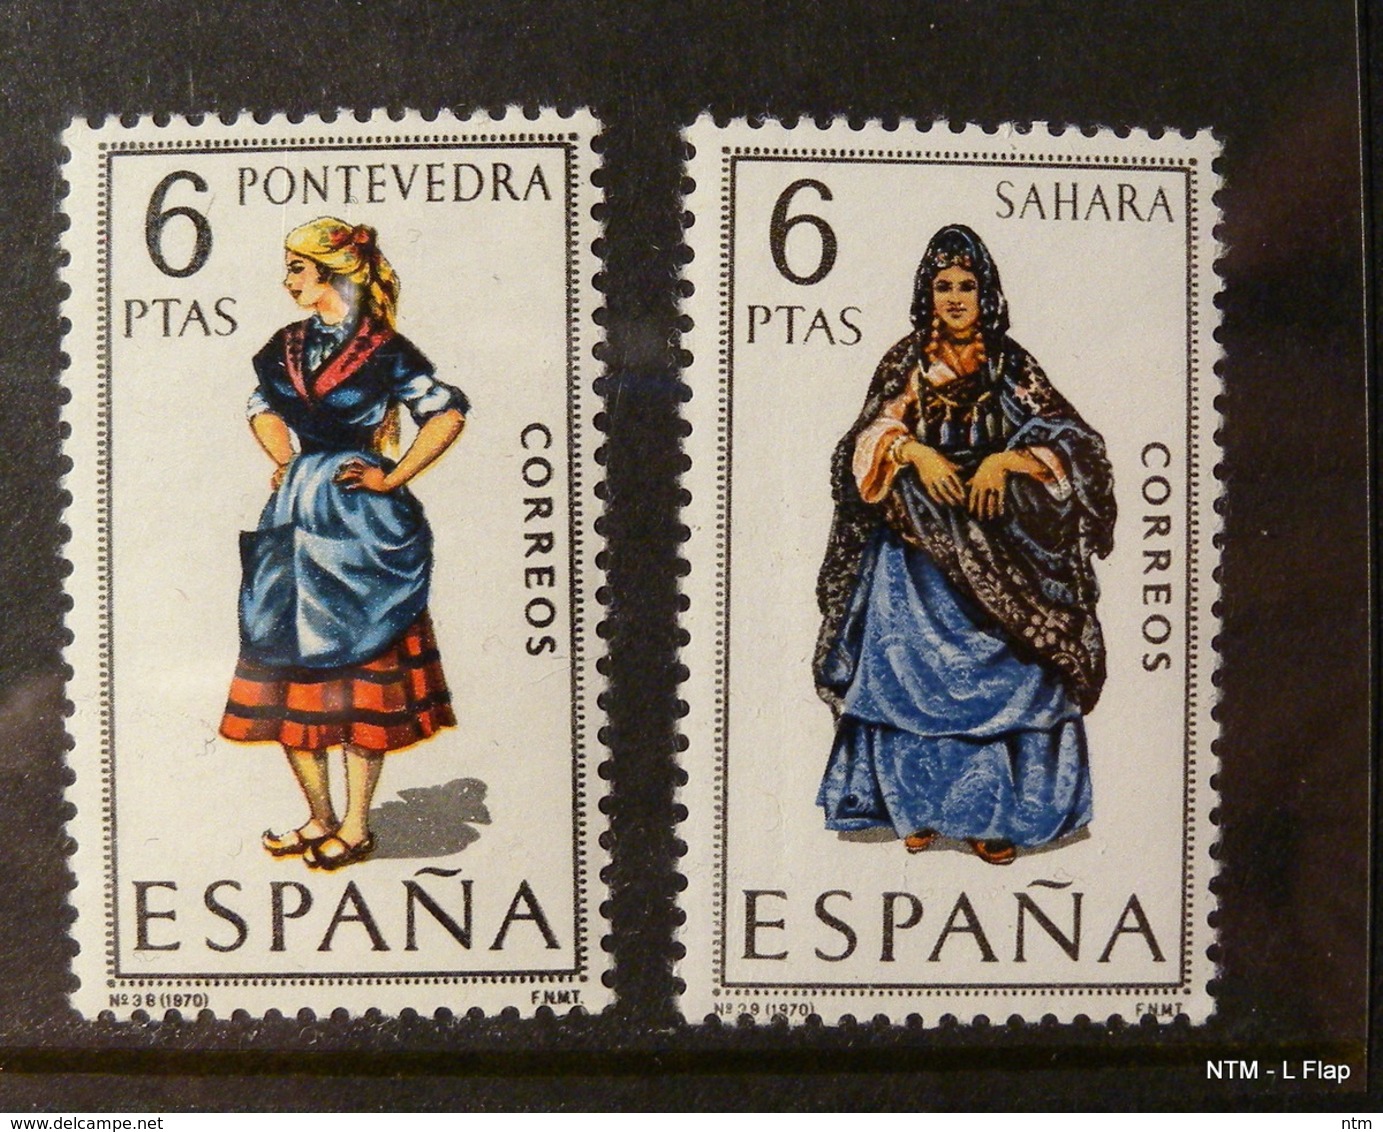 SPAIN 1967-1971. Provincial Costumes. 53 stamps.